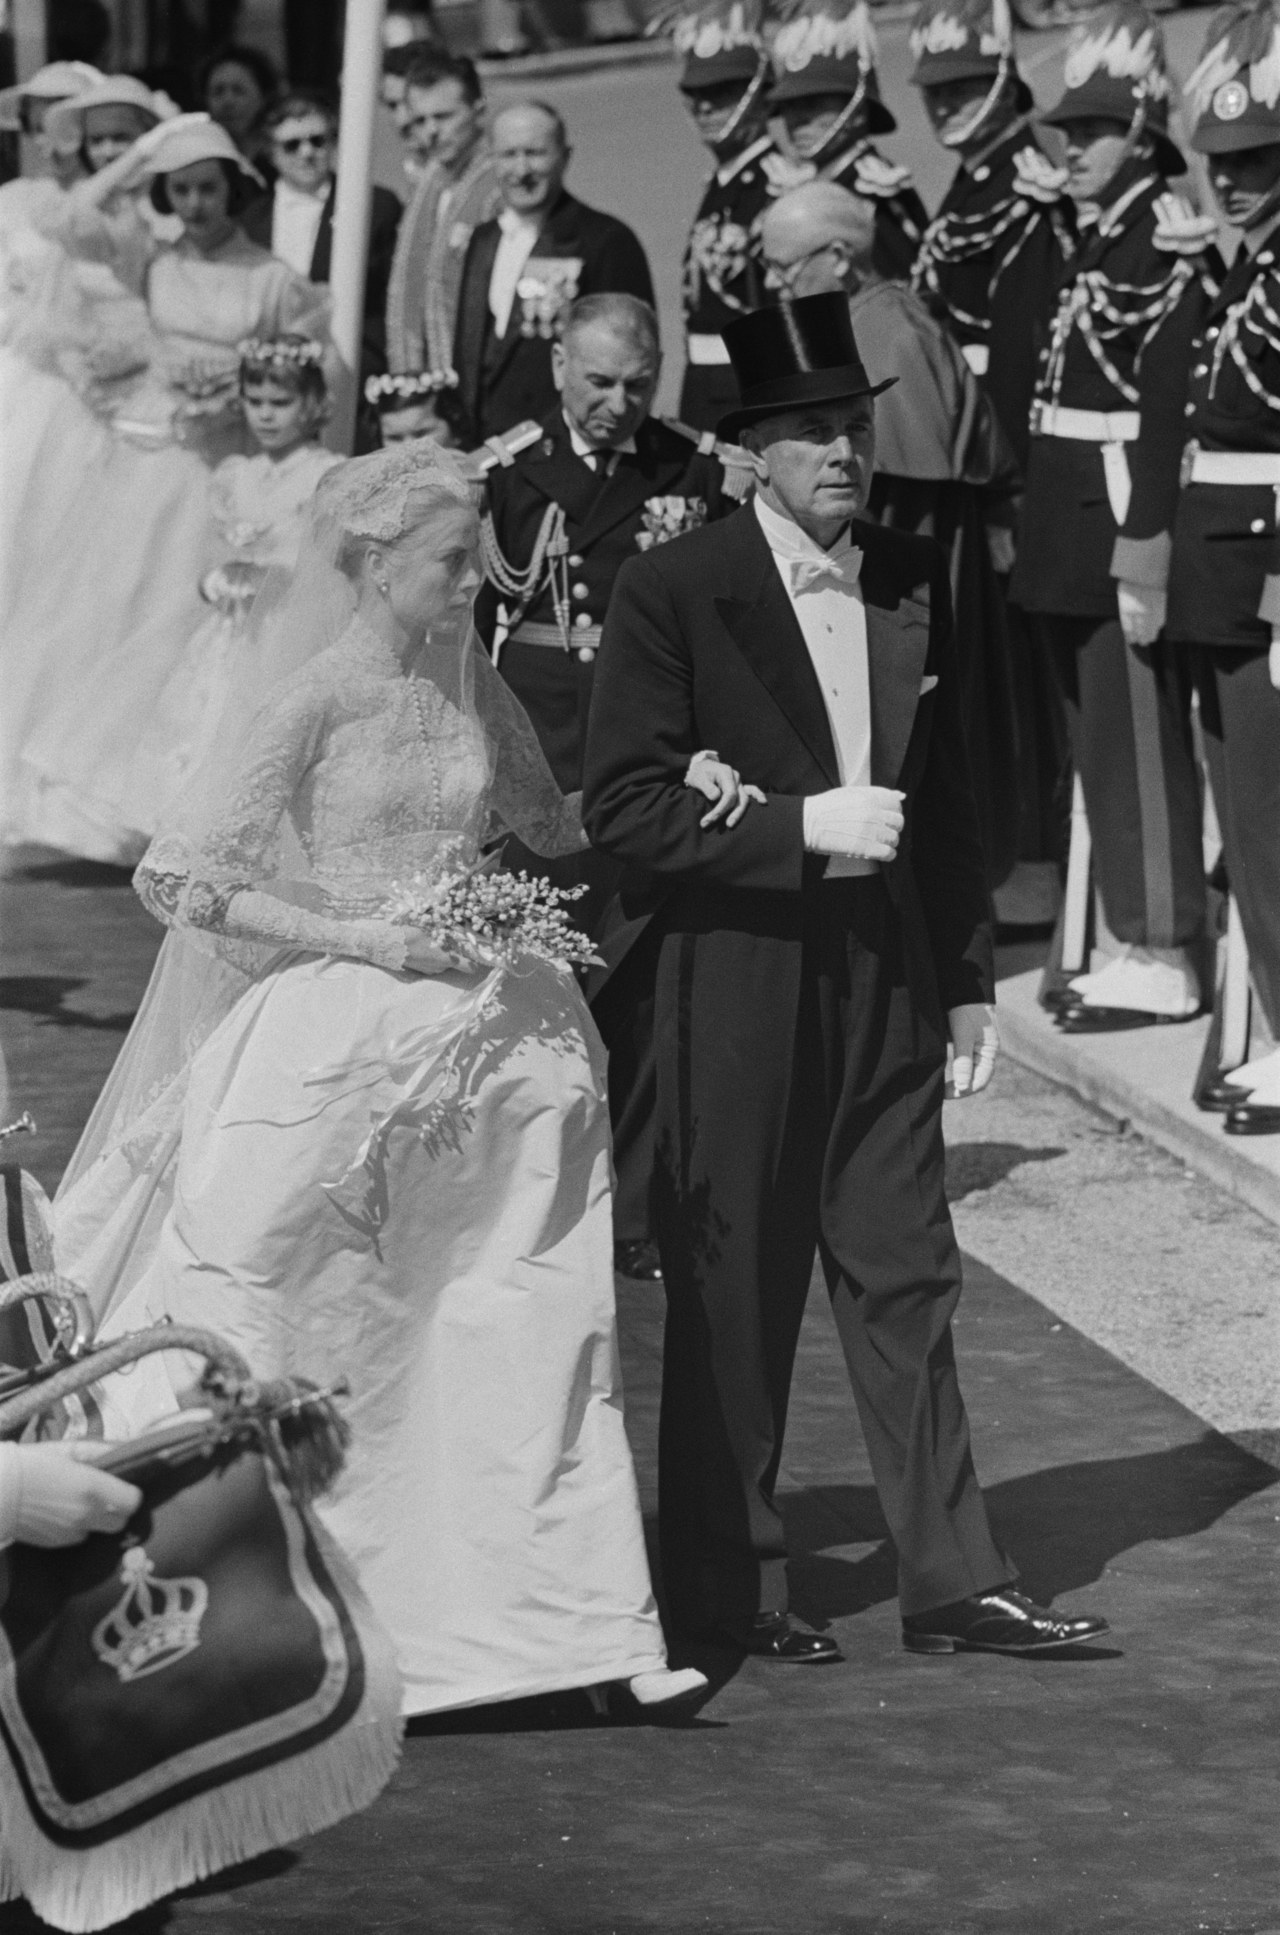 amerikanisch actress Grace Kelly (1929 - 1982) arrives at Saint Nicholas Cathedral, for her wedding to Prince Rainier III, Monaco, 19th April 1956. Original publication: Picture Post - 8336 - The Hour Of Marriage - pub. 28th April 1956 (Photo by Joseph McKeown/Picture Post/Hulton Archive/Getty Images)